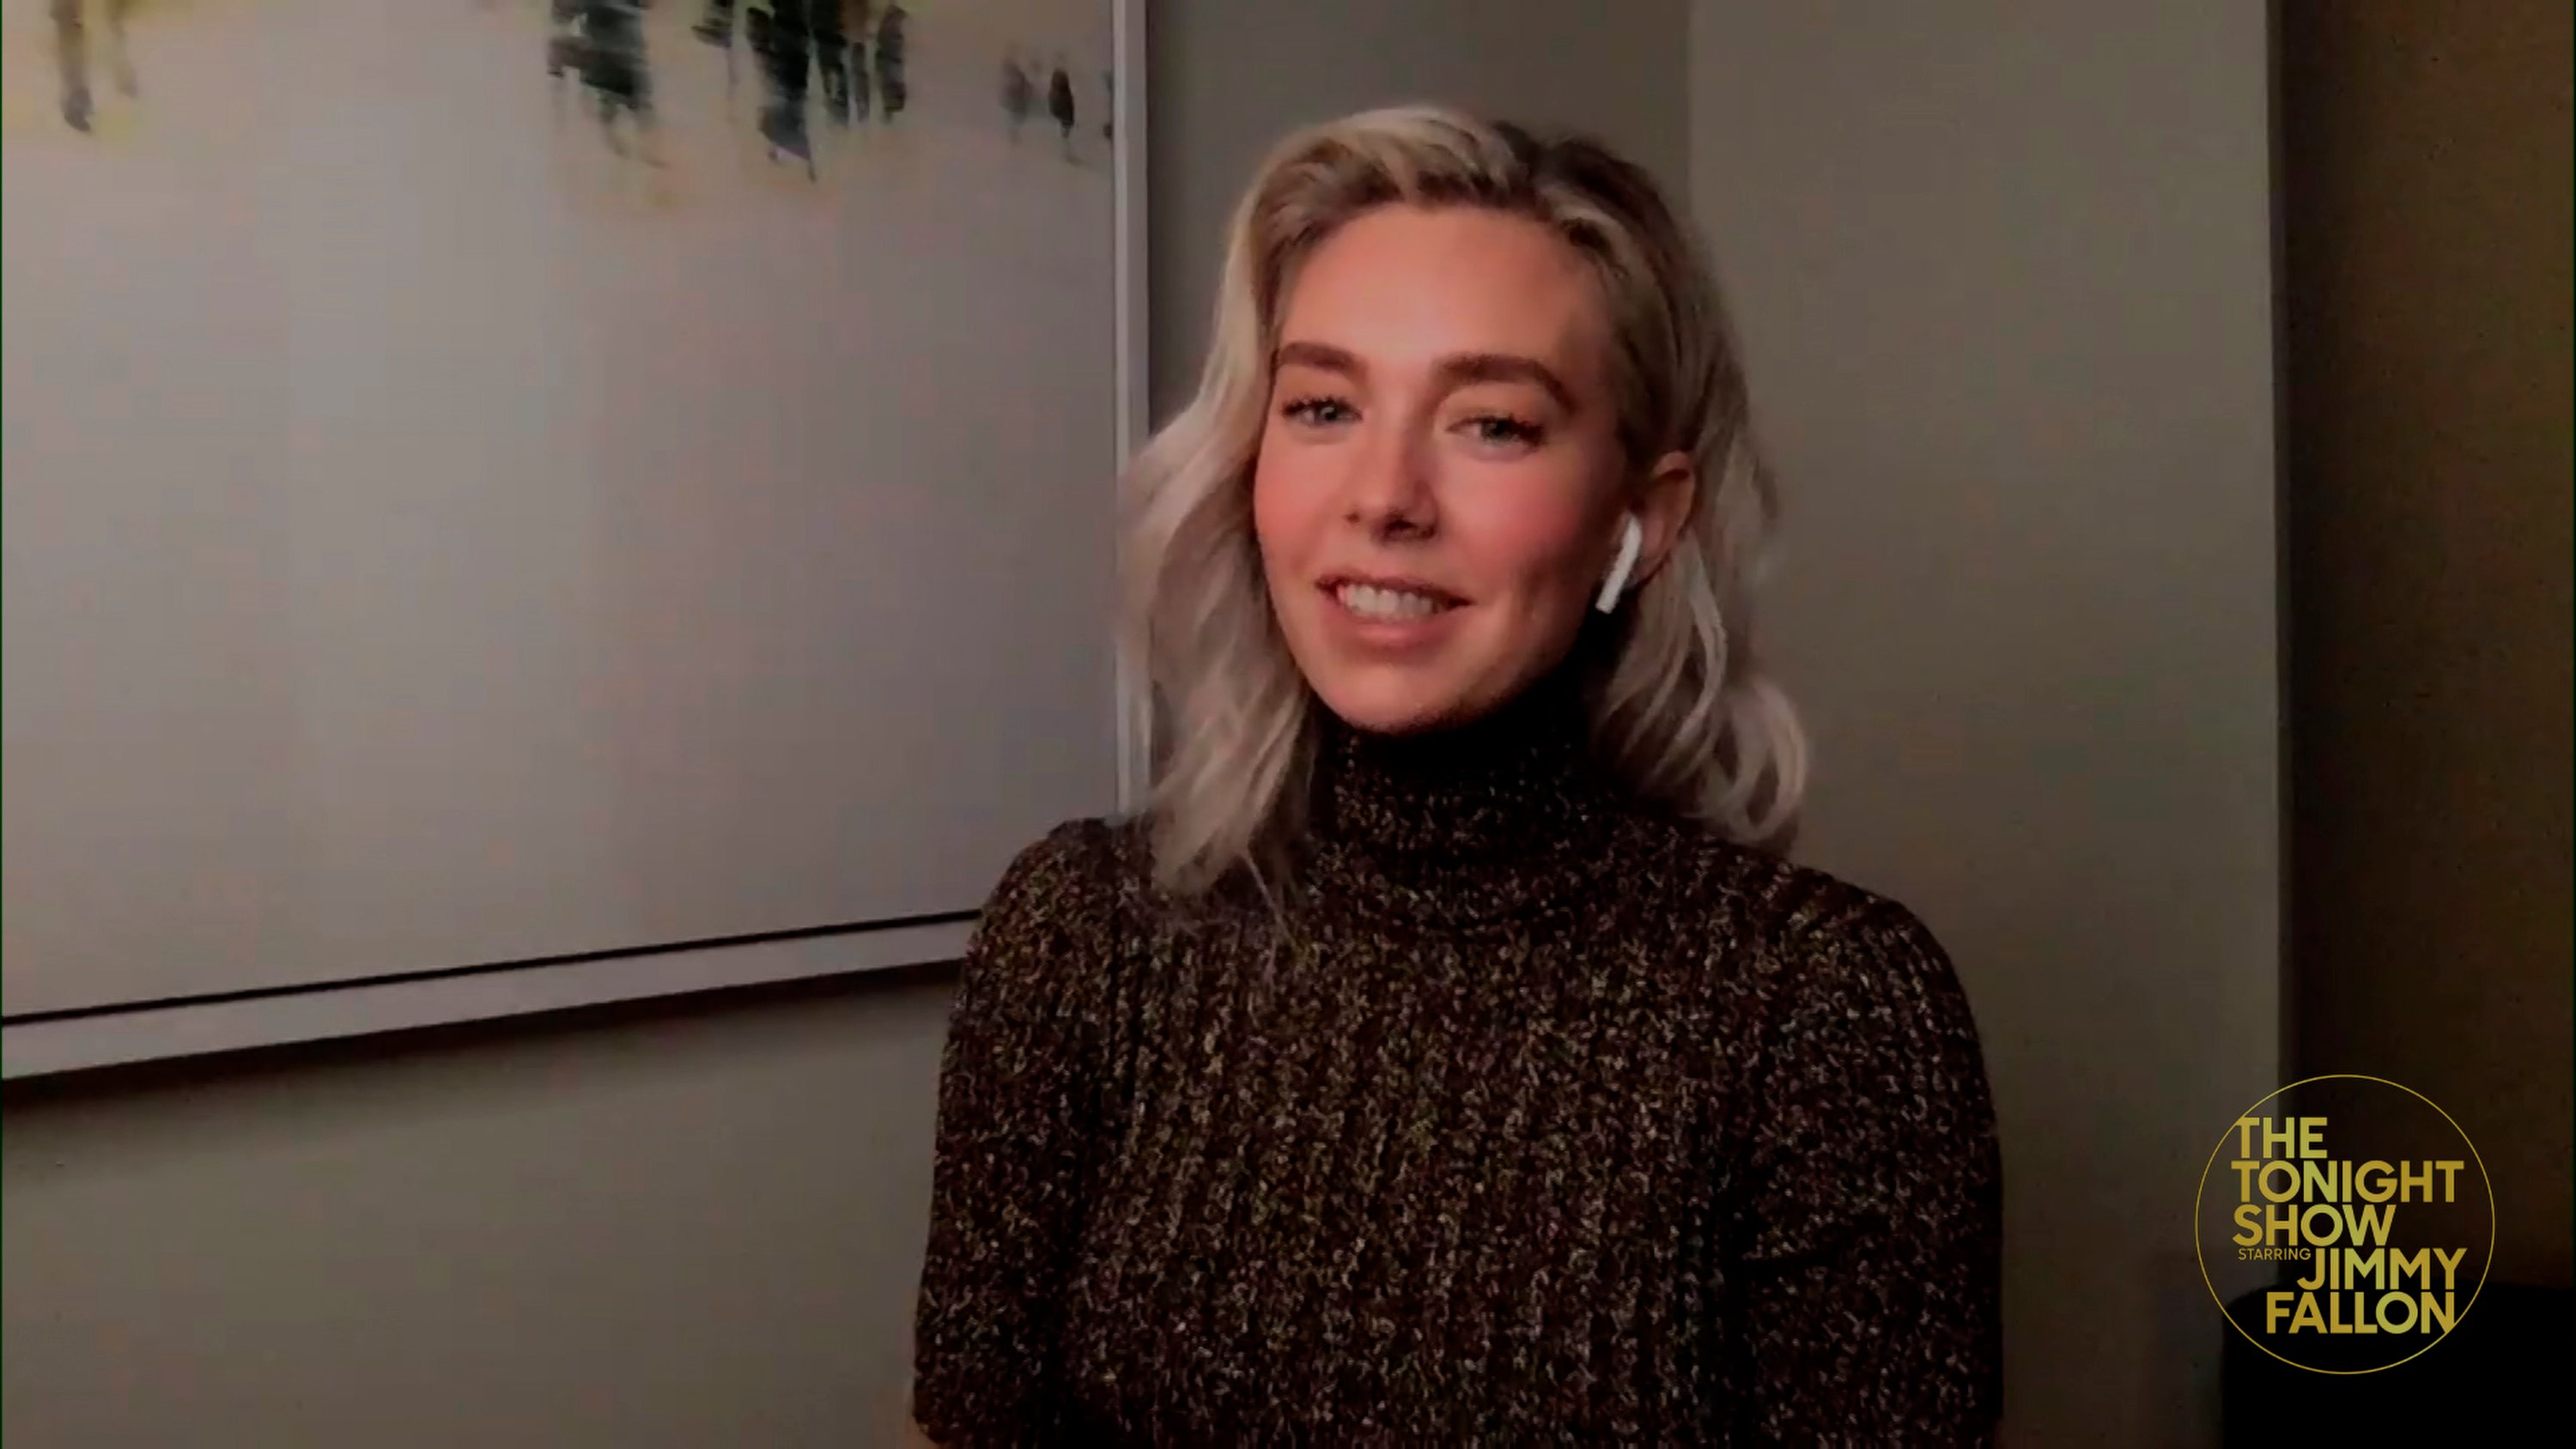 Screengrab of Vanessa Kirby during an interview on The Tonight Show Starring Jimmy Fallon